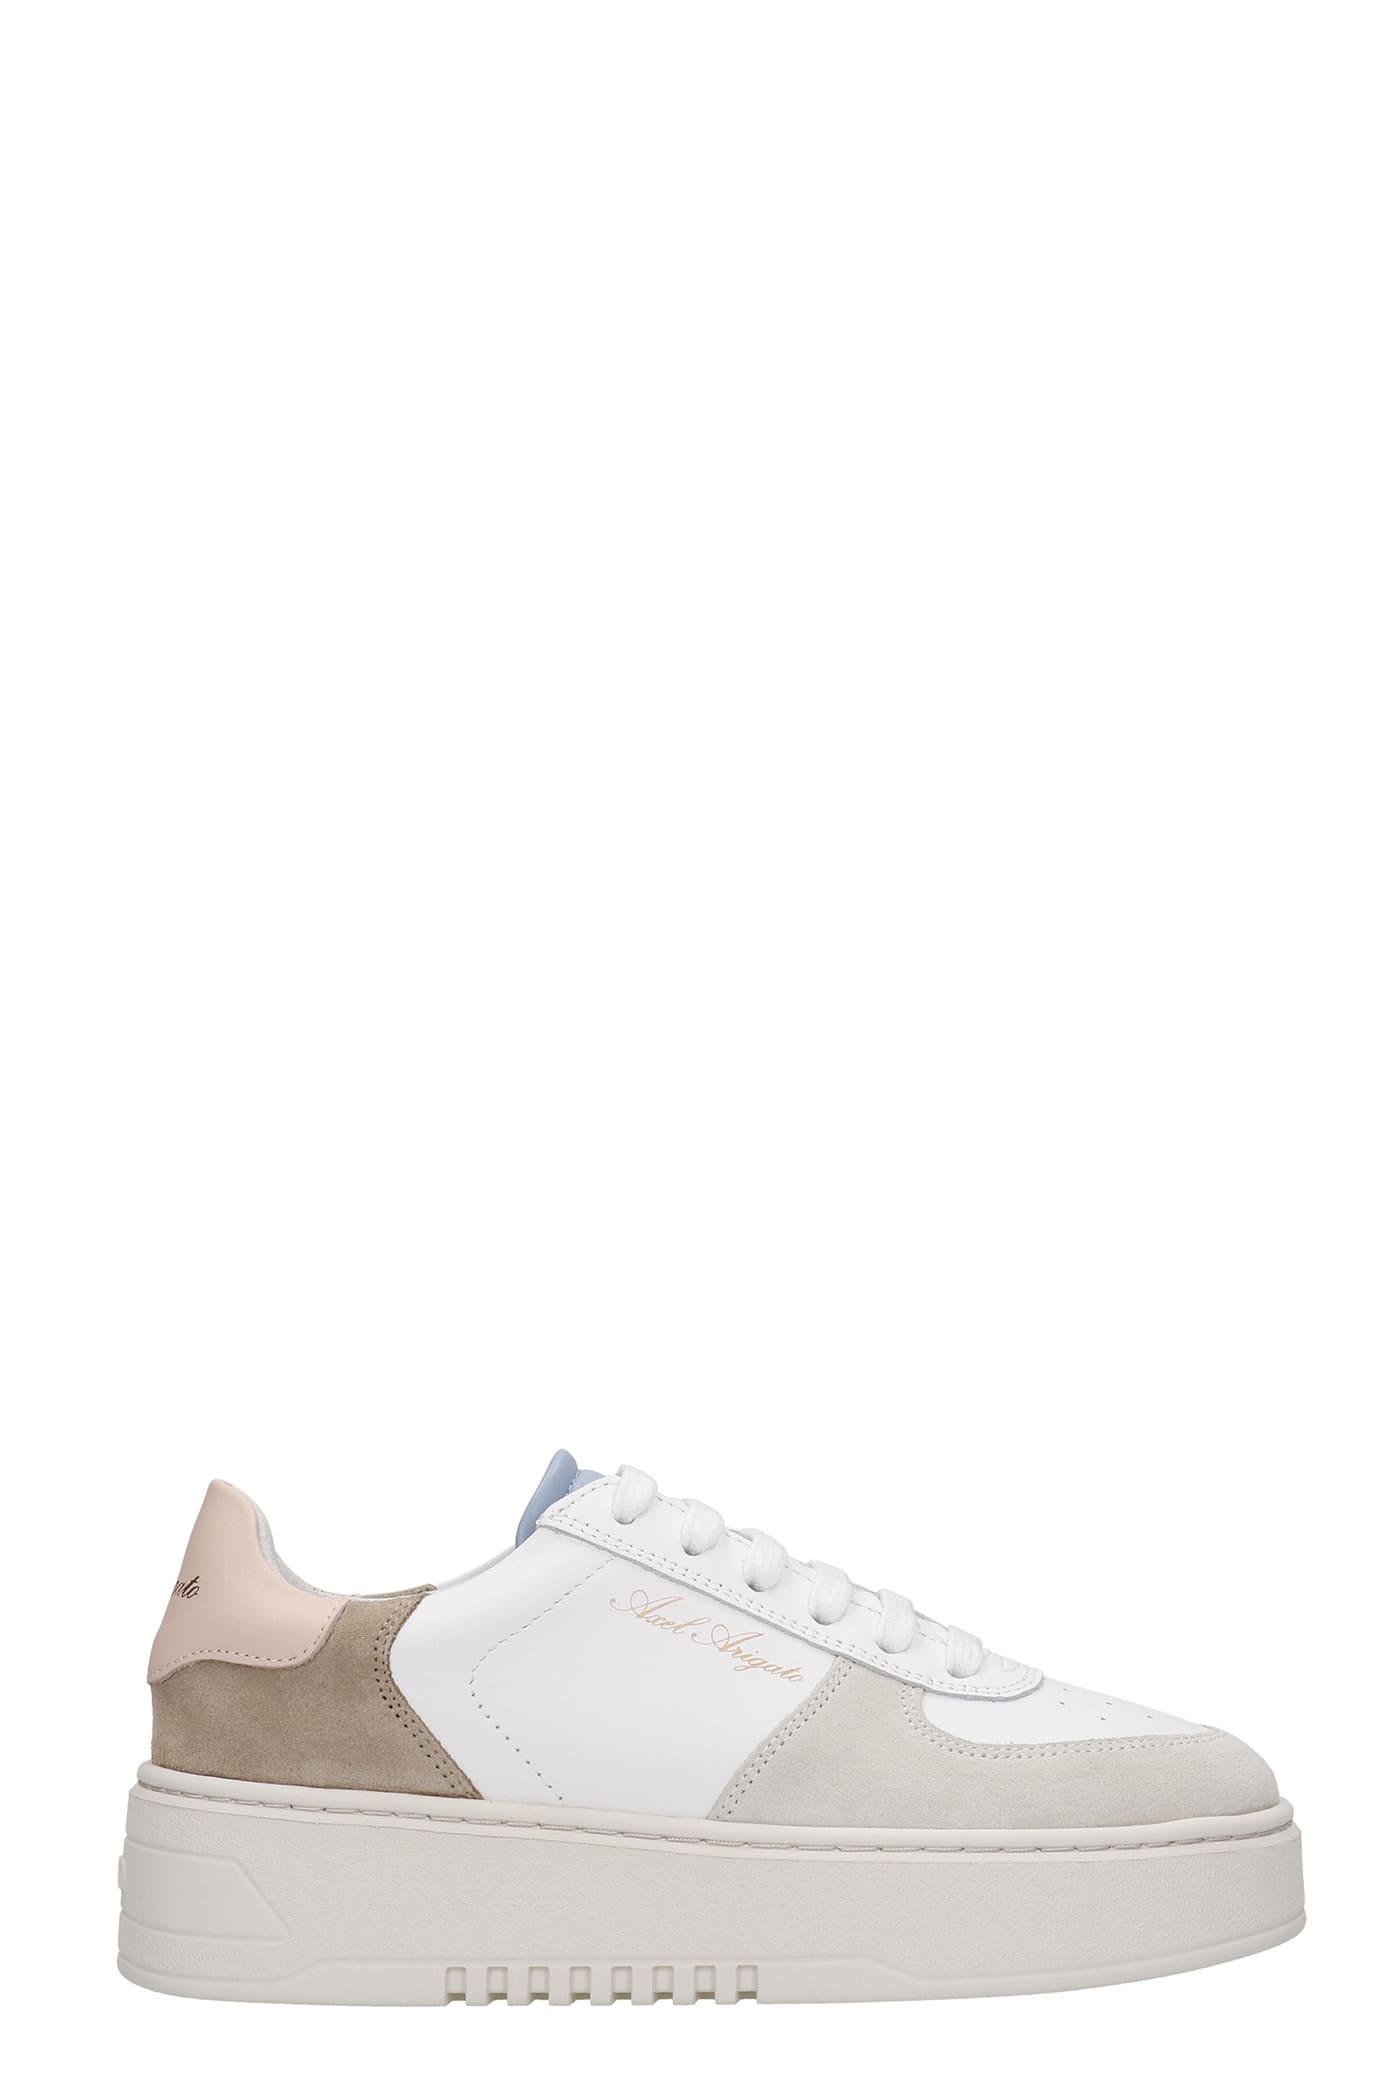 Axel Arigato Orbit Sneakers In White Suede And Leather